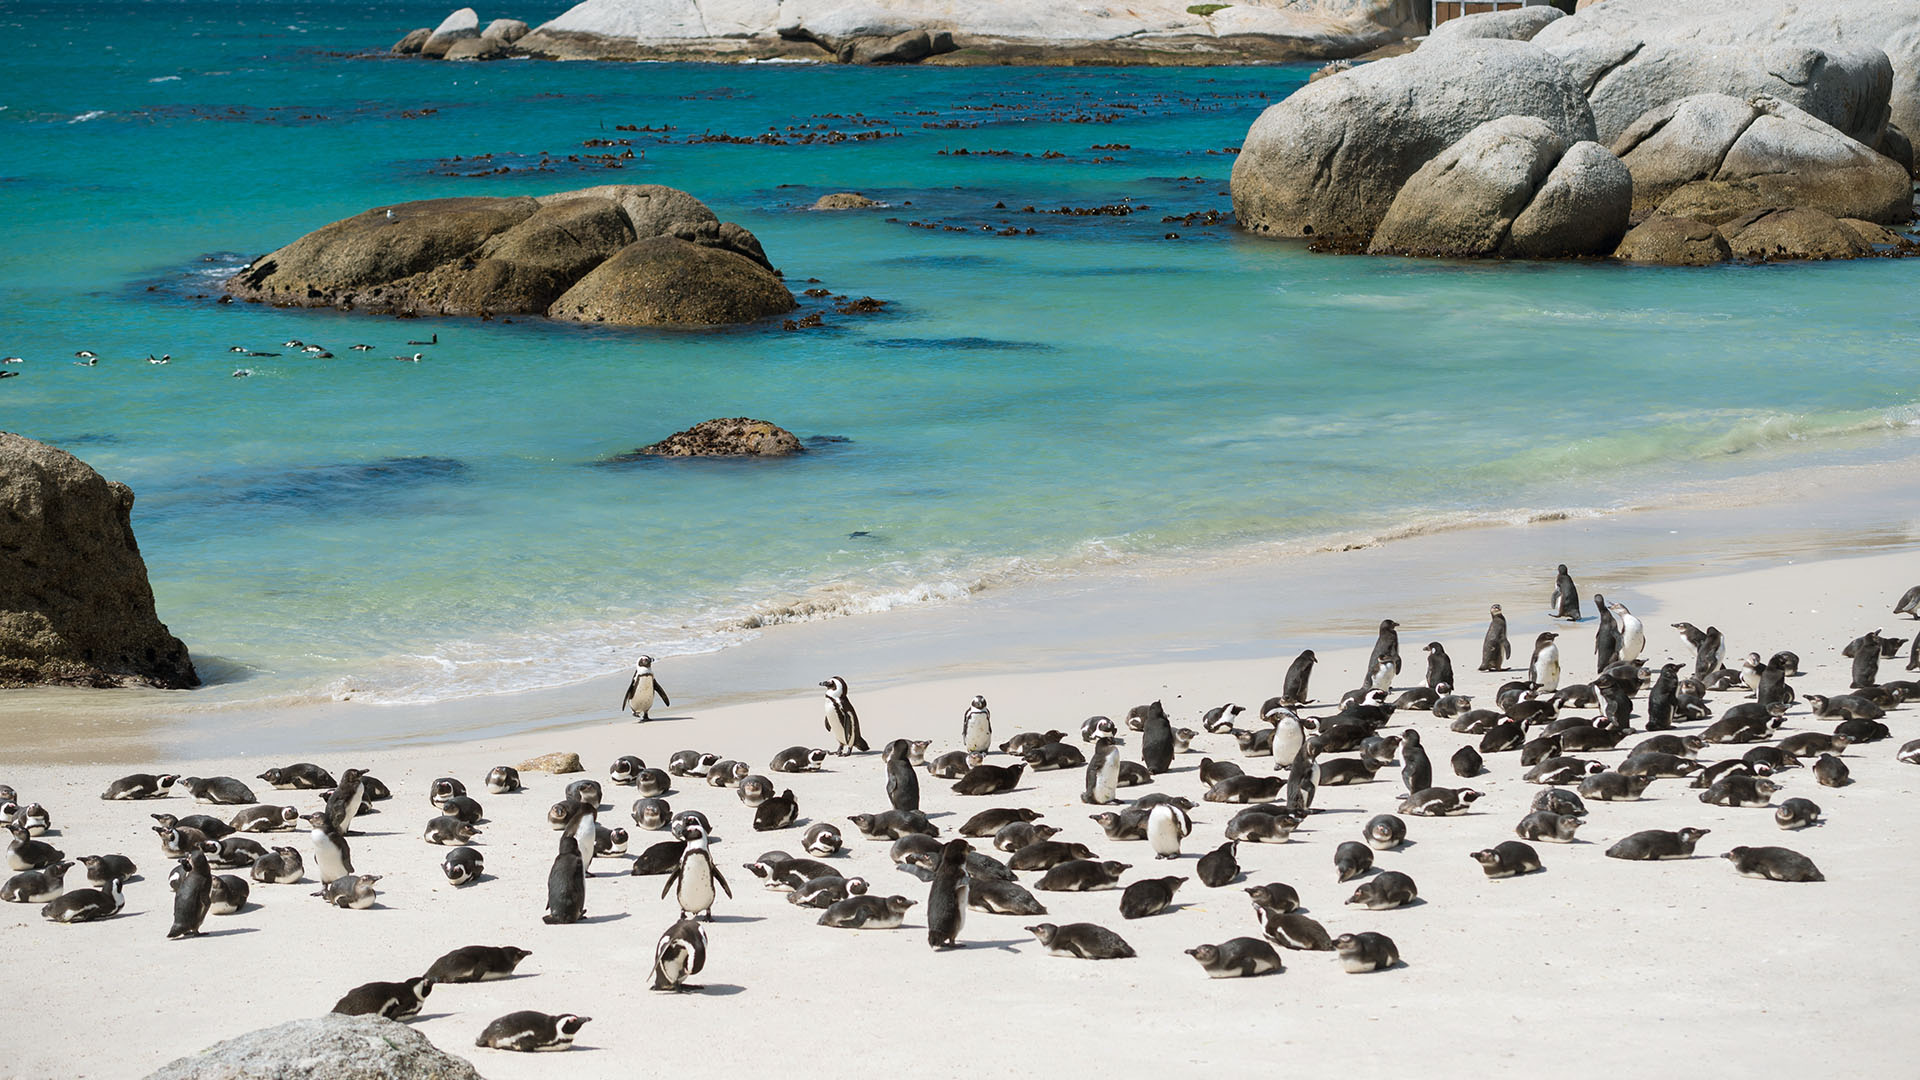 a large group of sunbathing penguins at Boulders Beach in South Africa